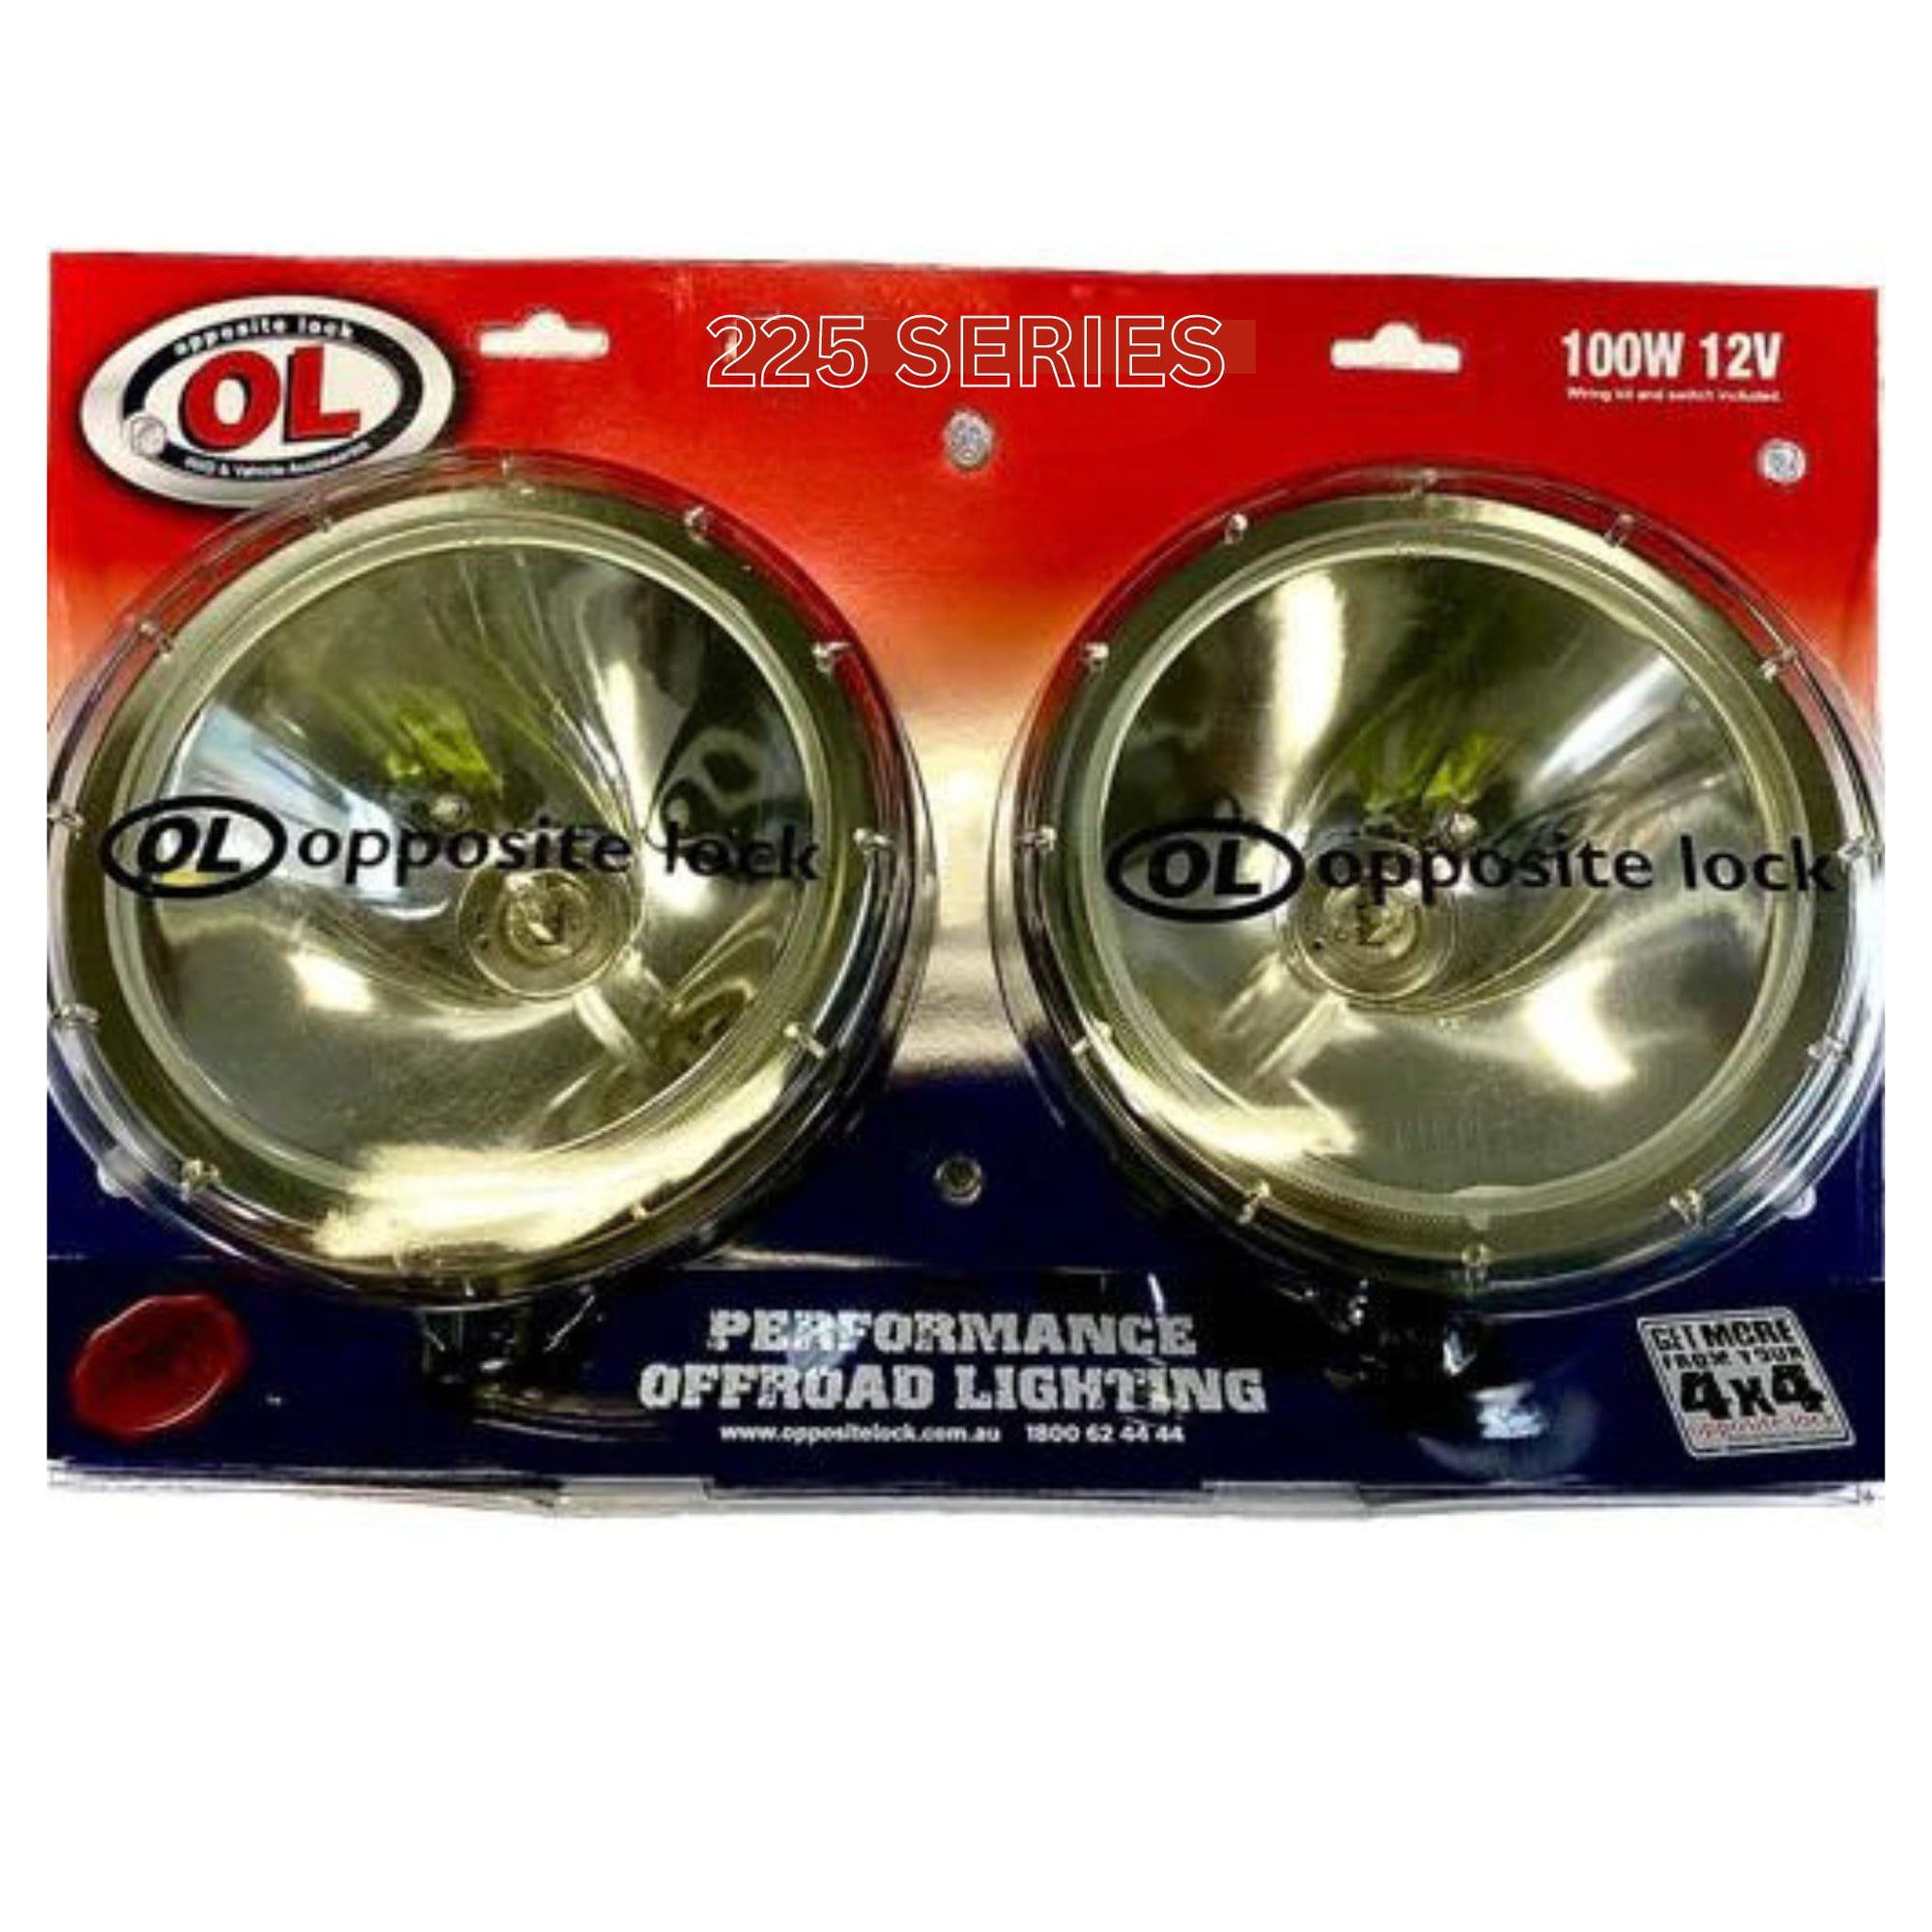 Opposite Lock 225 Series- 100W 12V (Performance Offroad Lighting) - Twin Pack - South East Clearance Centre